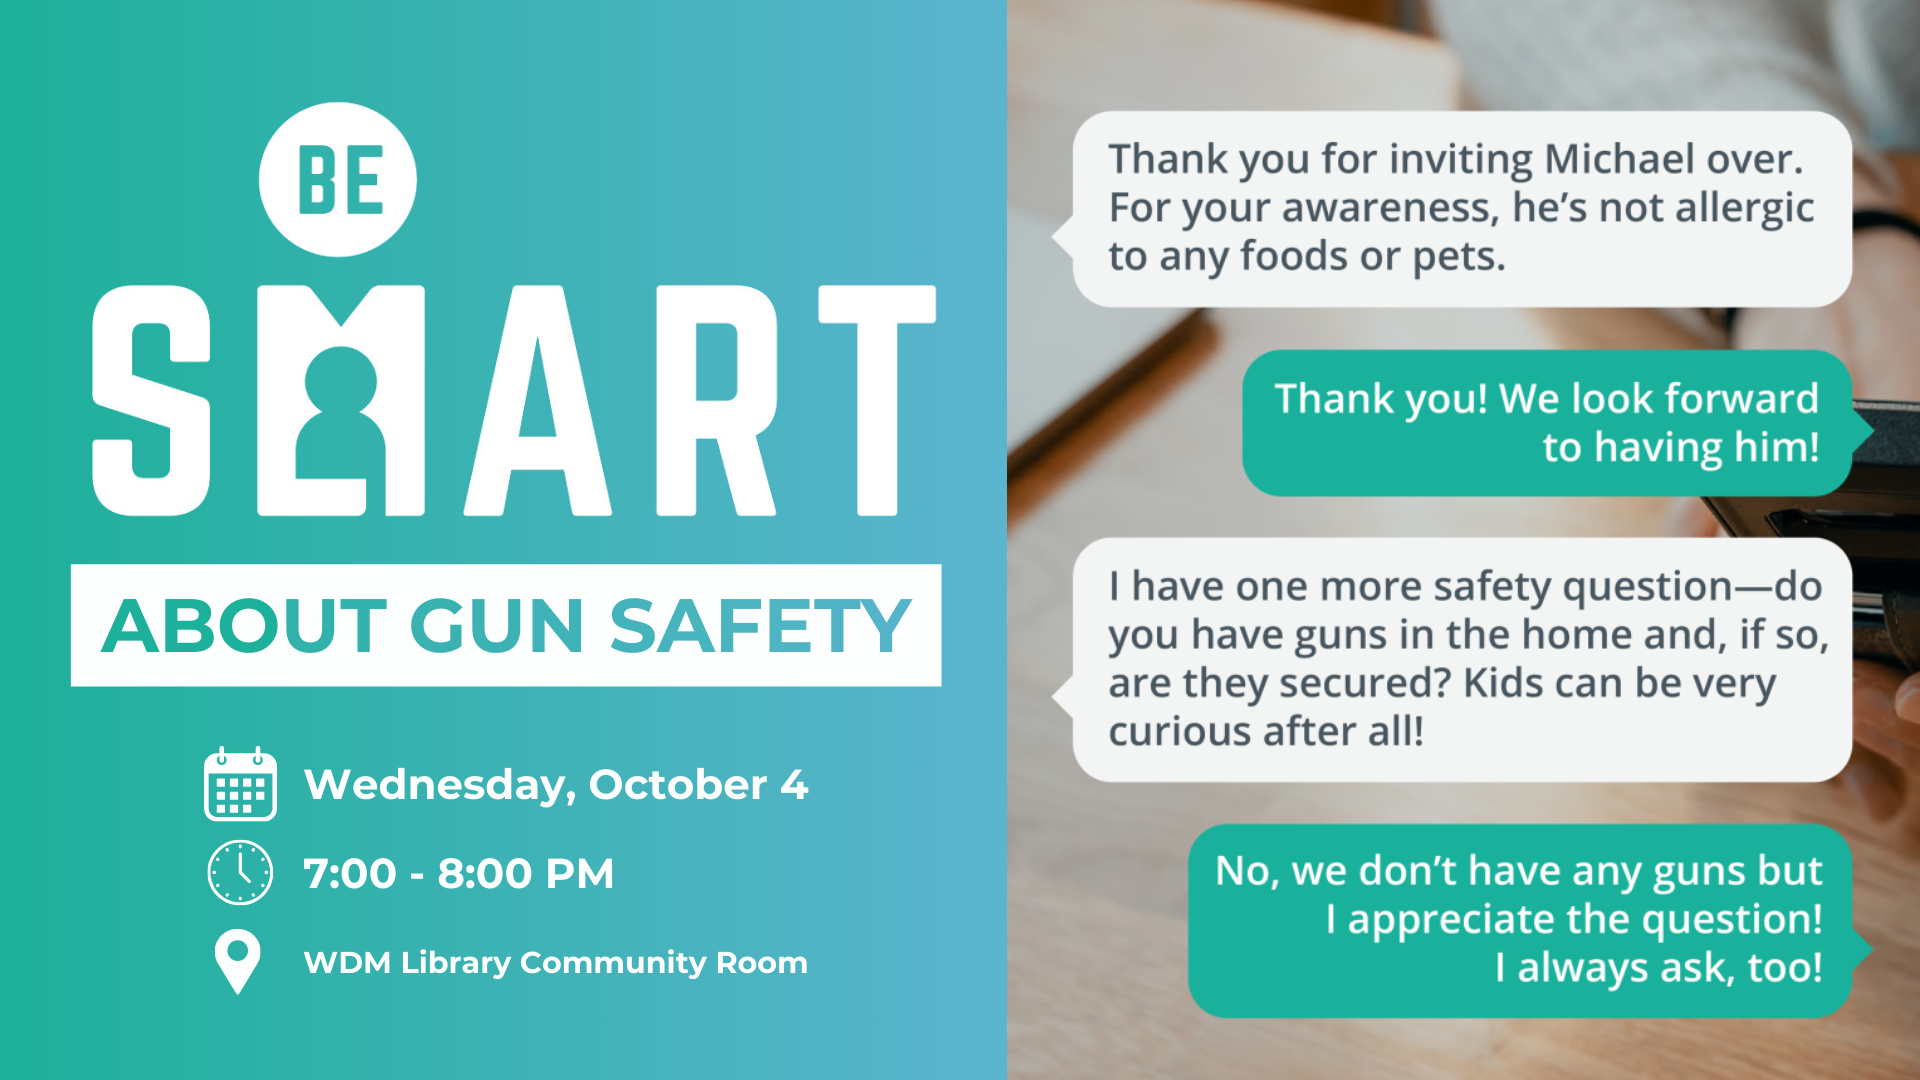 Logo for BeSMART; date/time of program; text dialogue re: guns in the home